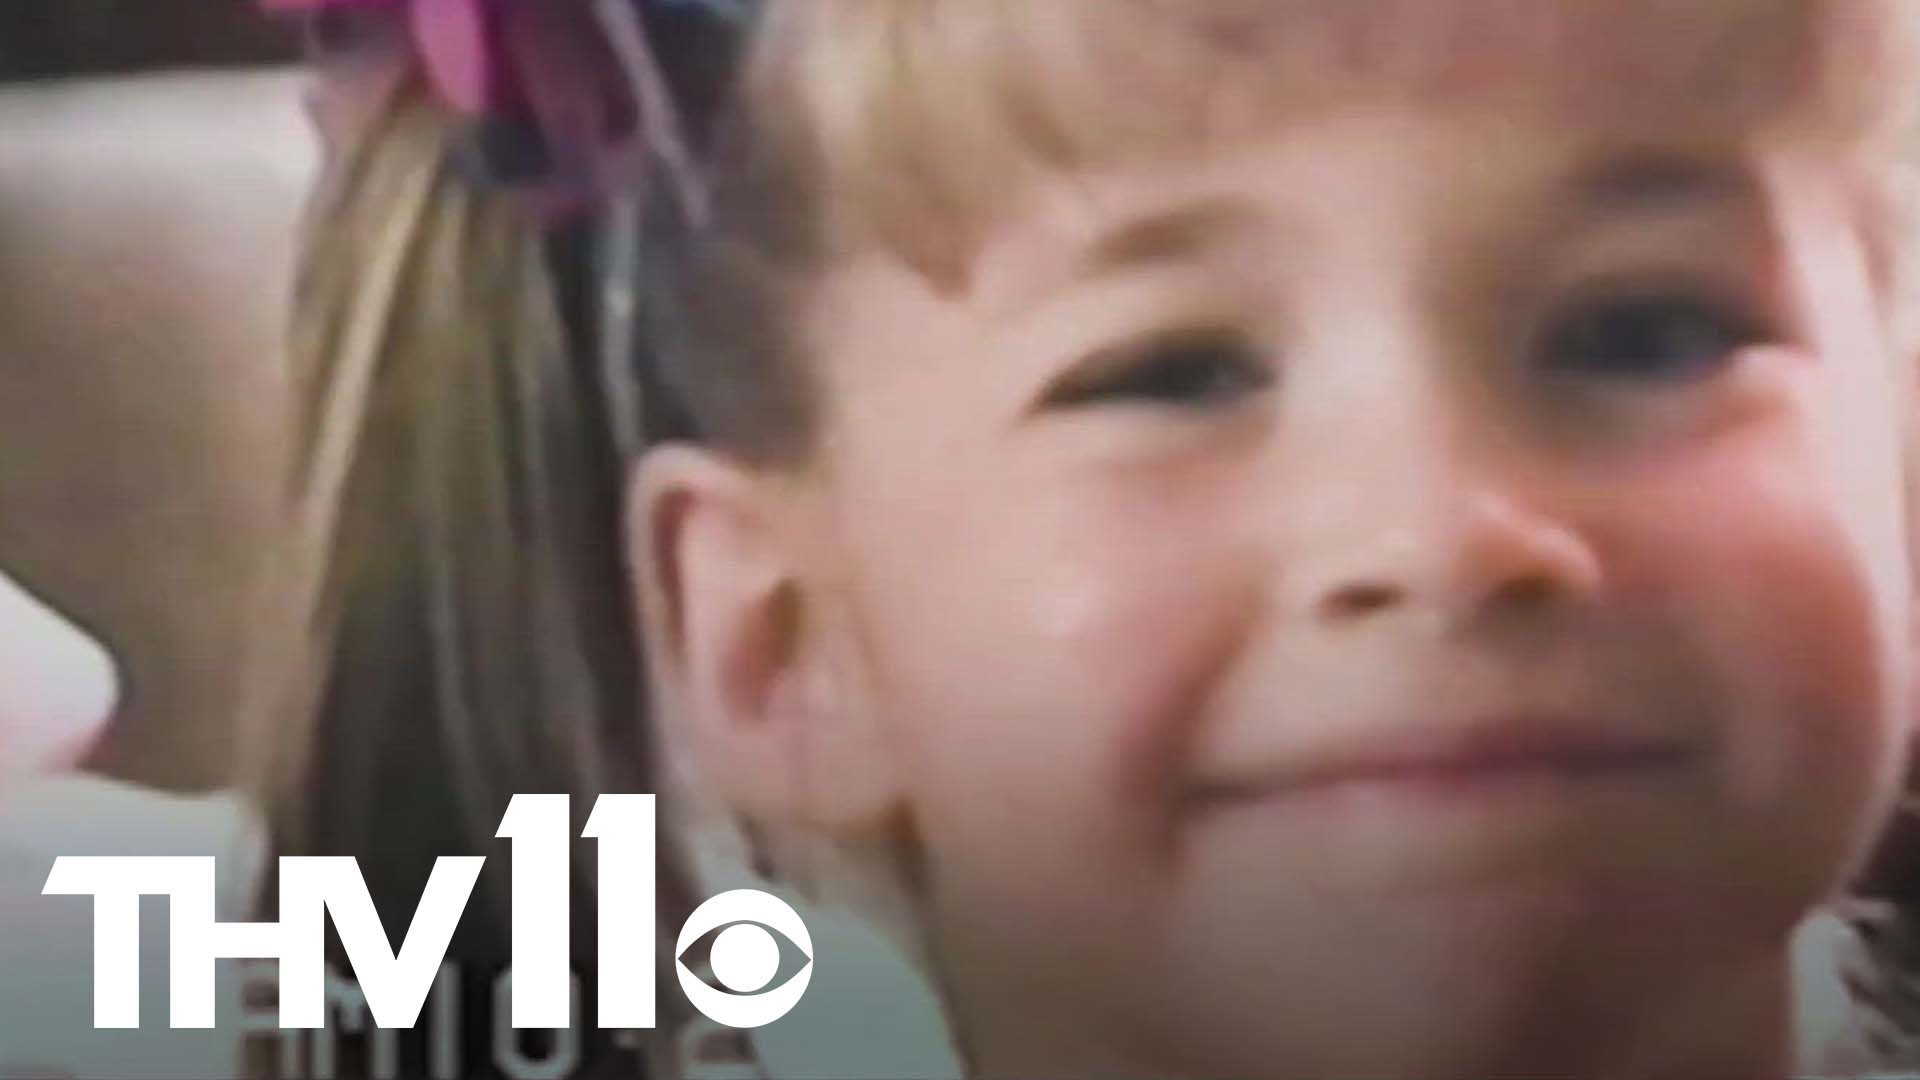 The case of 6-year-old Morgan Nick vanishing from an Alma little league game in 1995 sparked nationwide interest in the 90s.